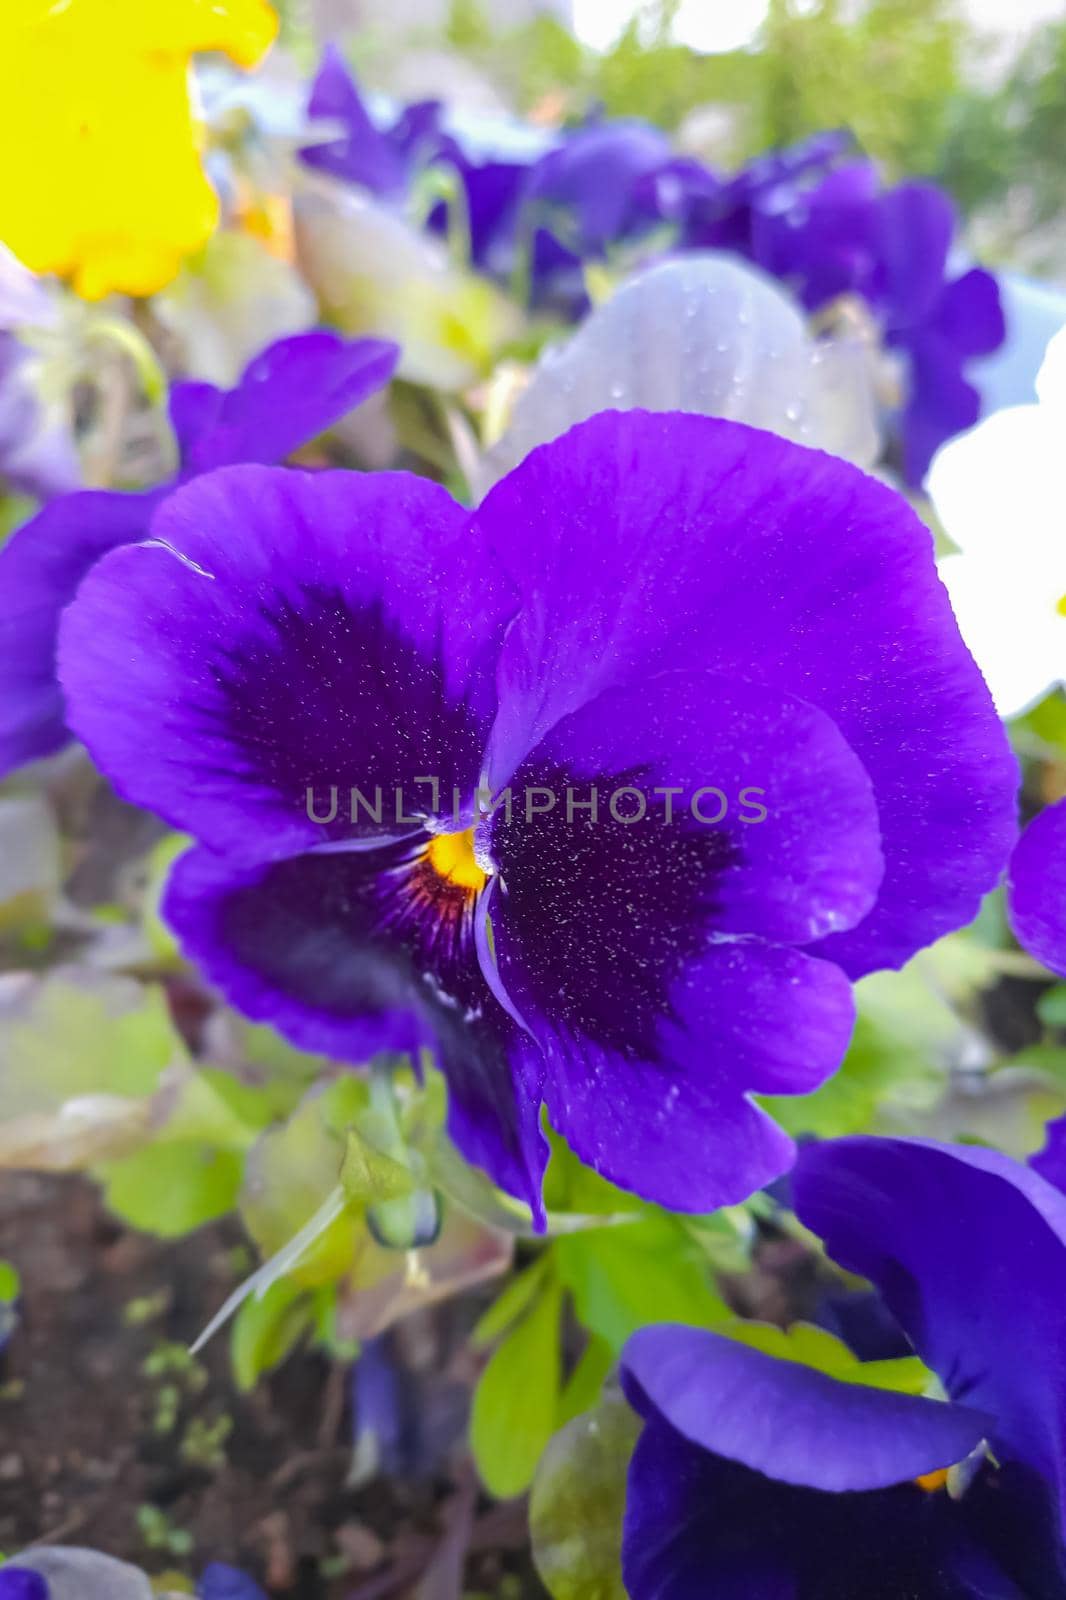 Beautiful and unique in its beauty flowers Pansies.